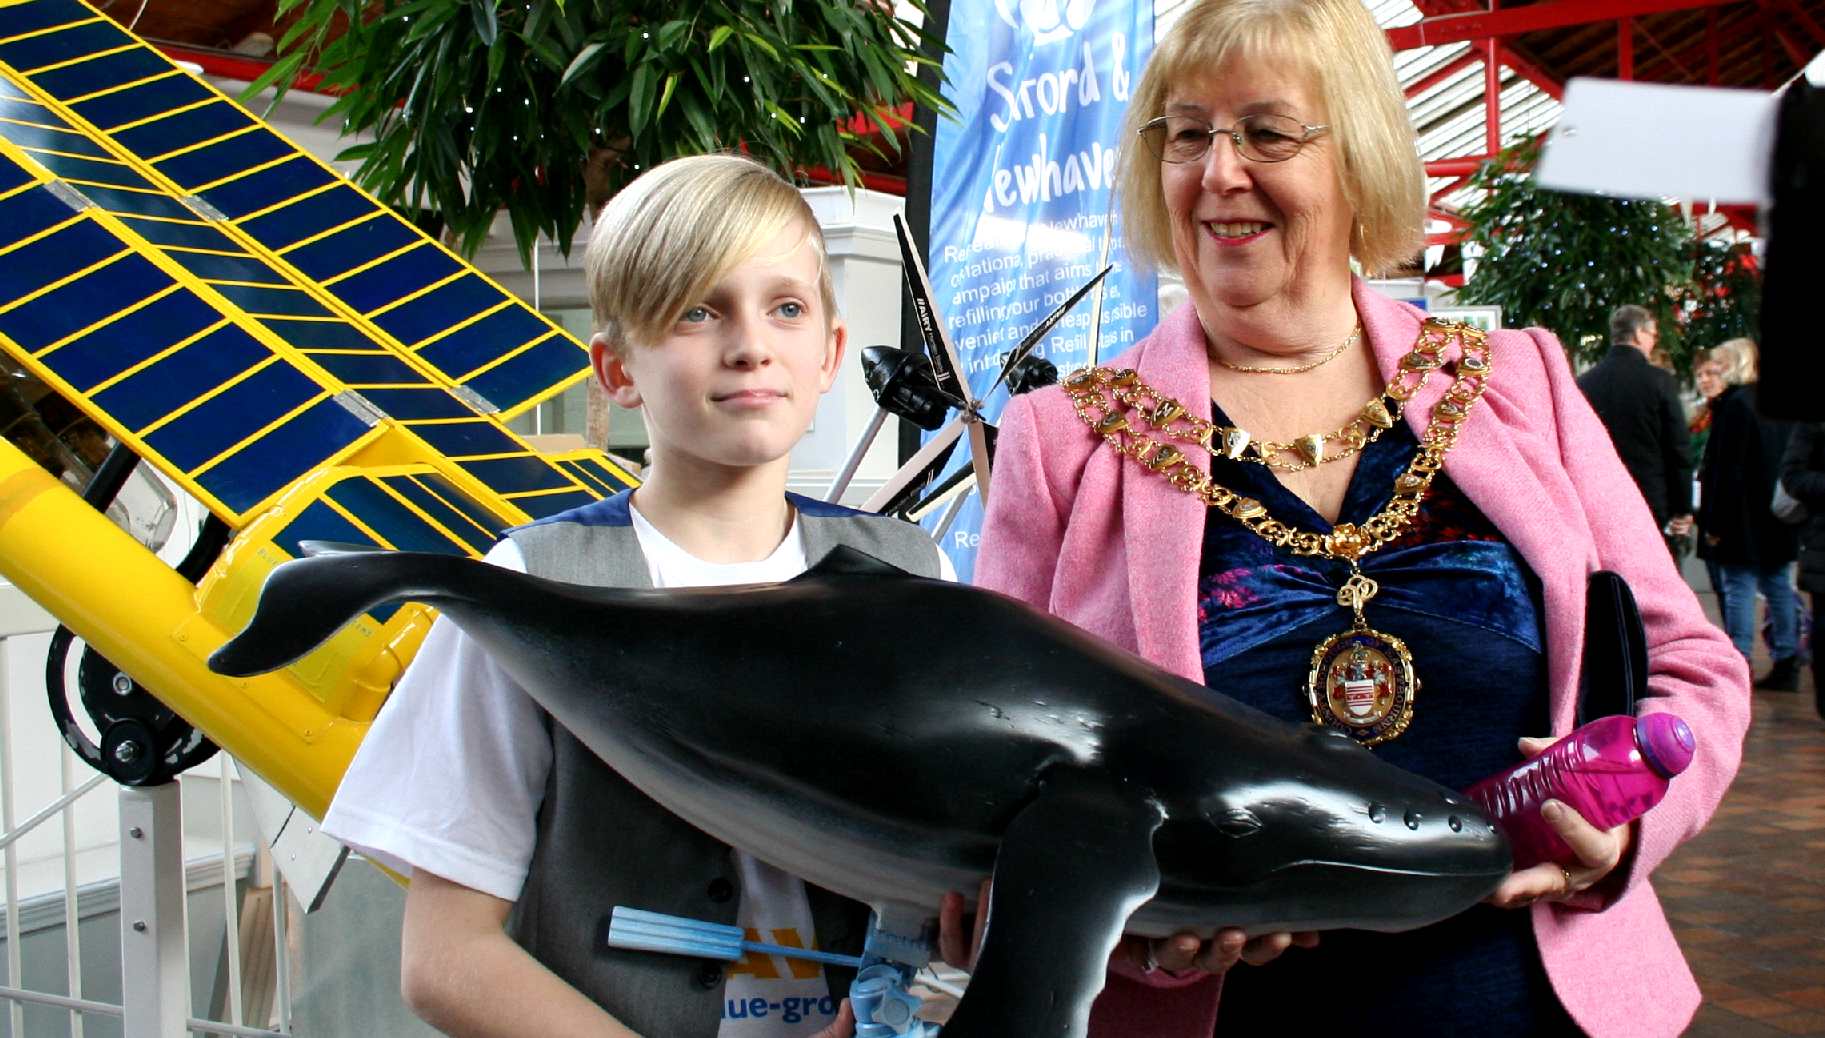 Kulo Luna the humpback whale model with Gill Mattock Mayor of Eastbourne